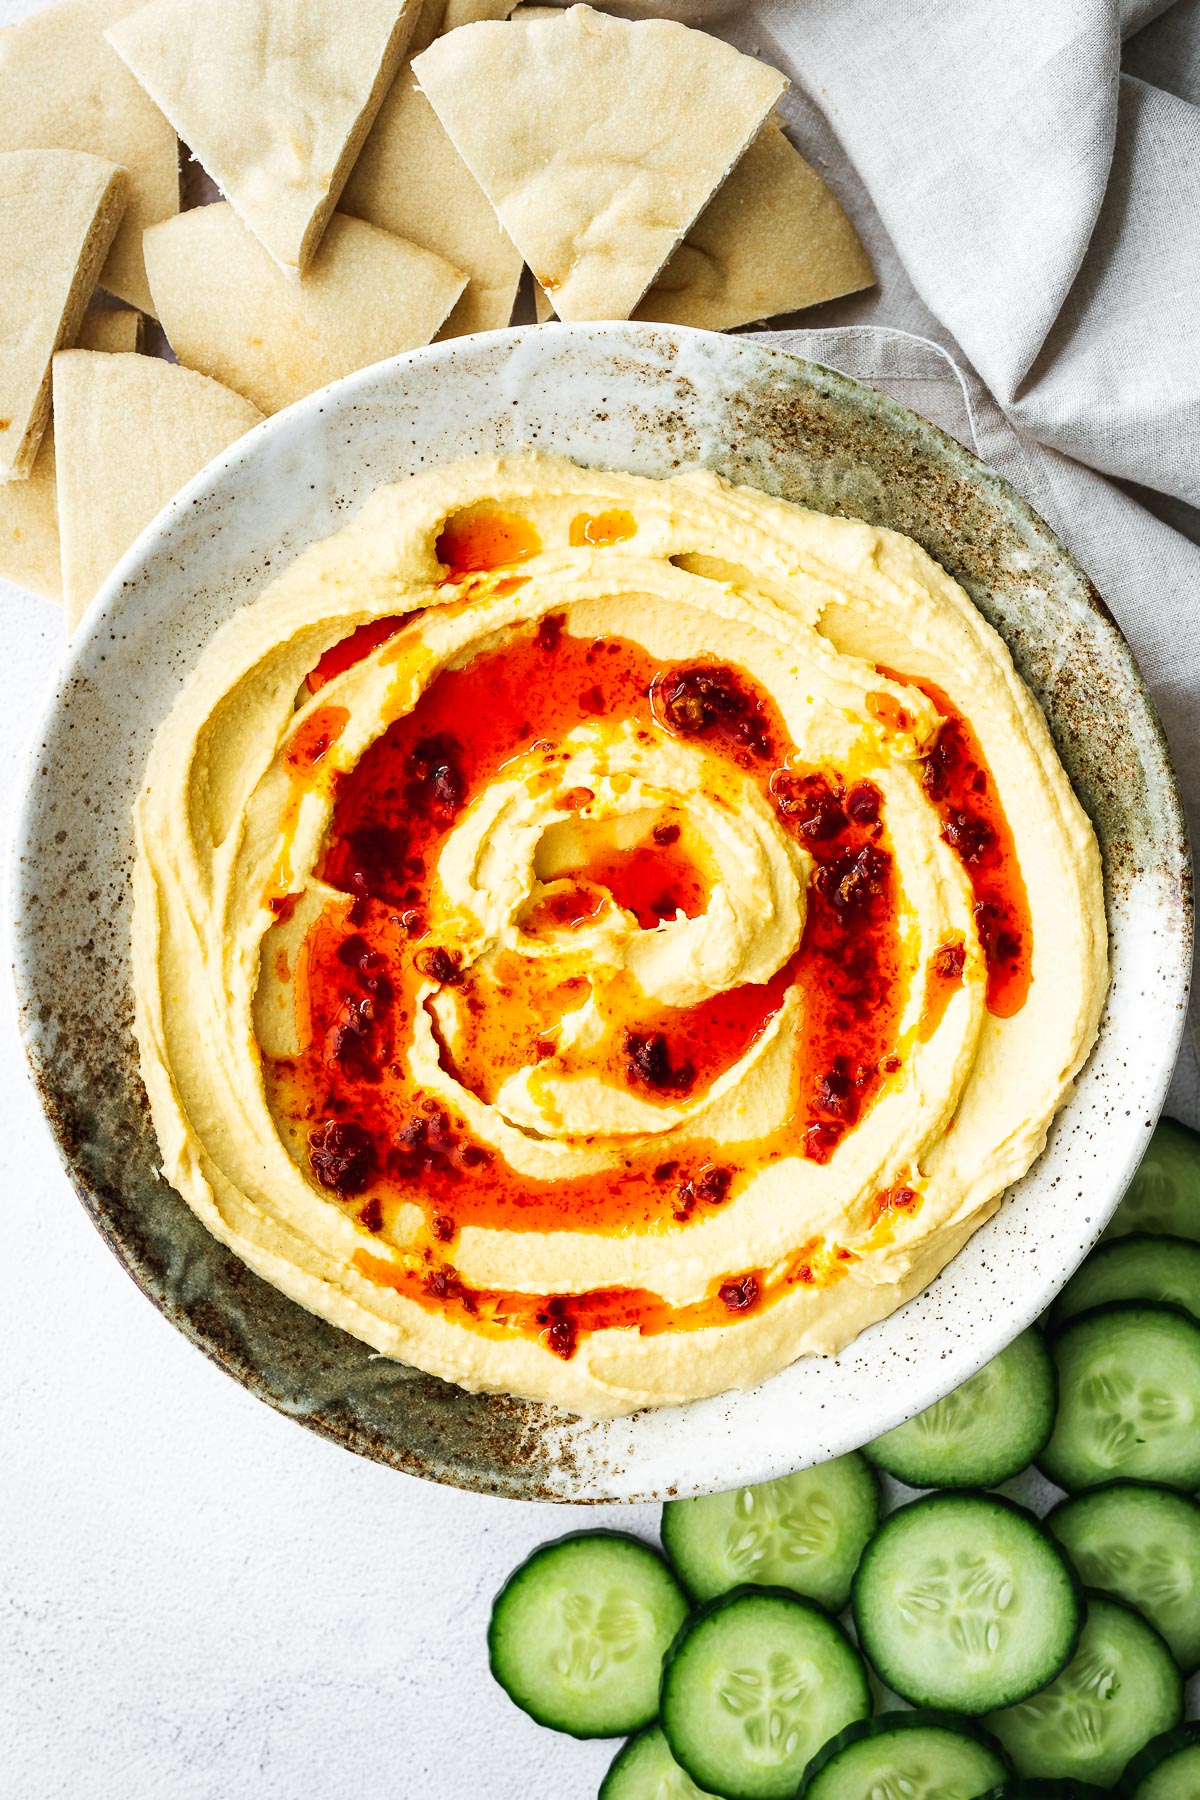 Top down view of a bowl of lemon hummus without garlic drizzled with harissa oil and served with cucumber slices and pita triangles.